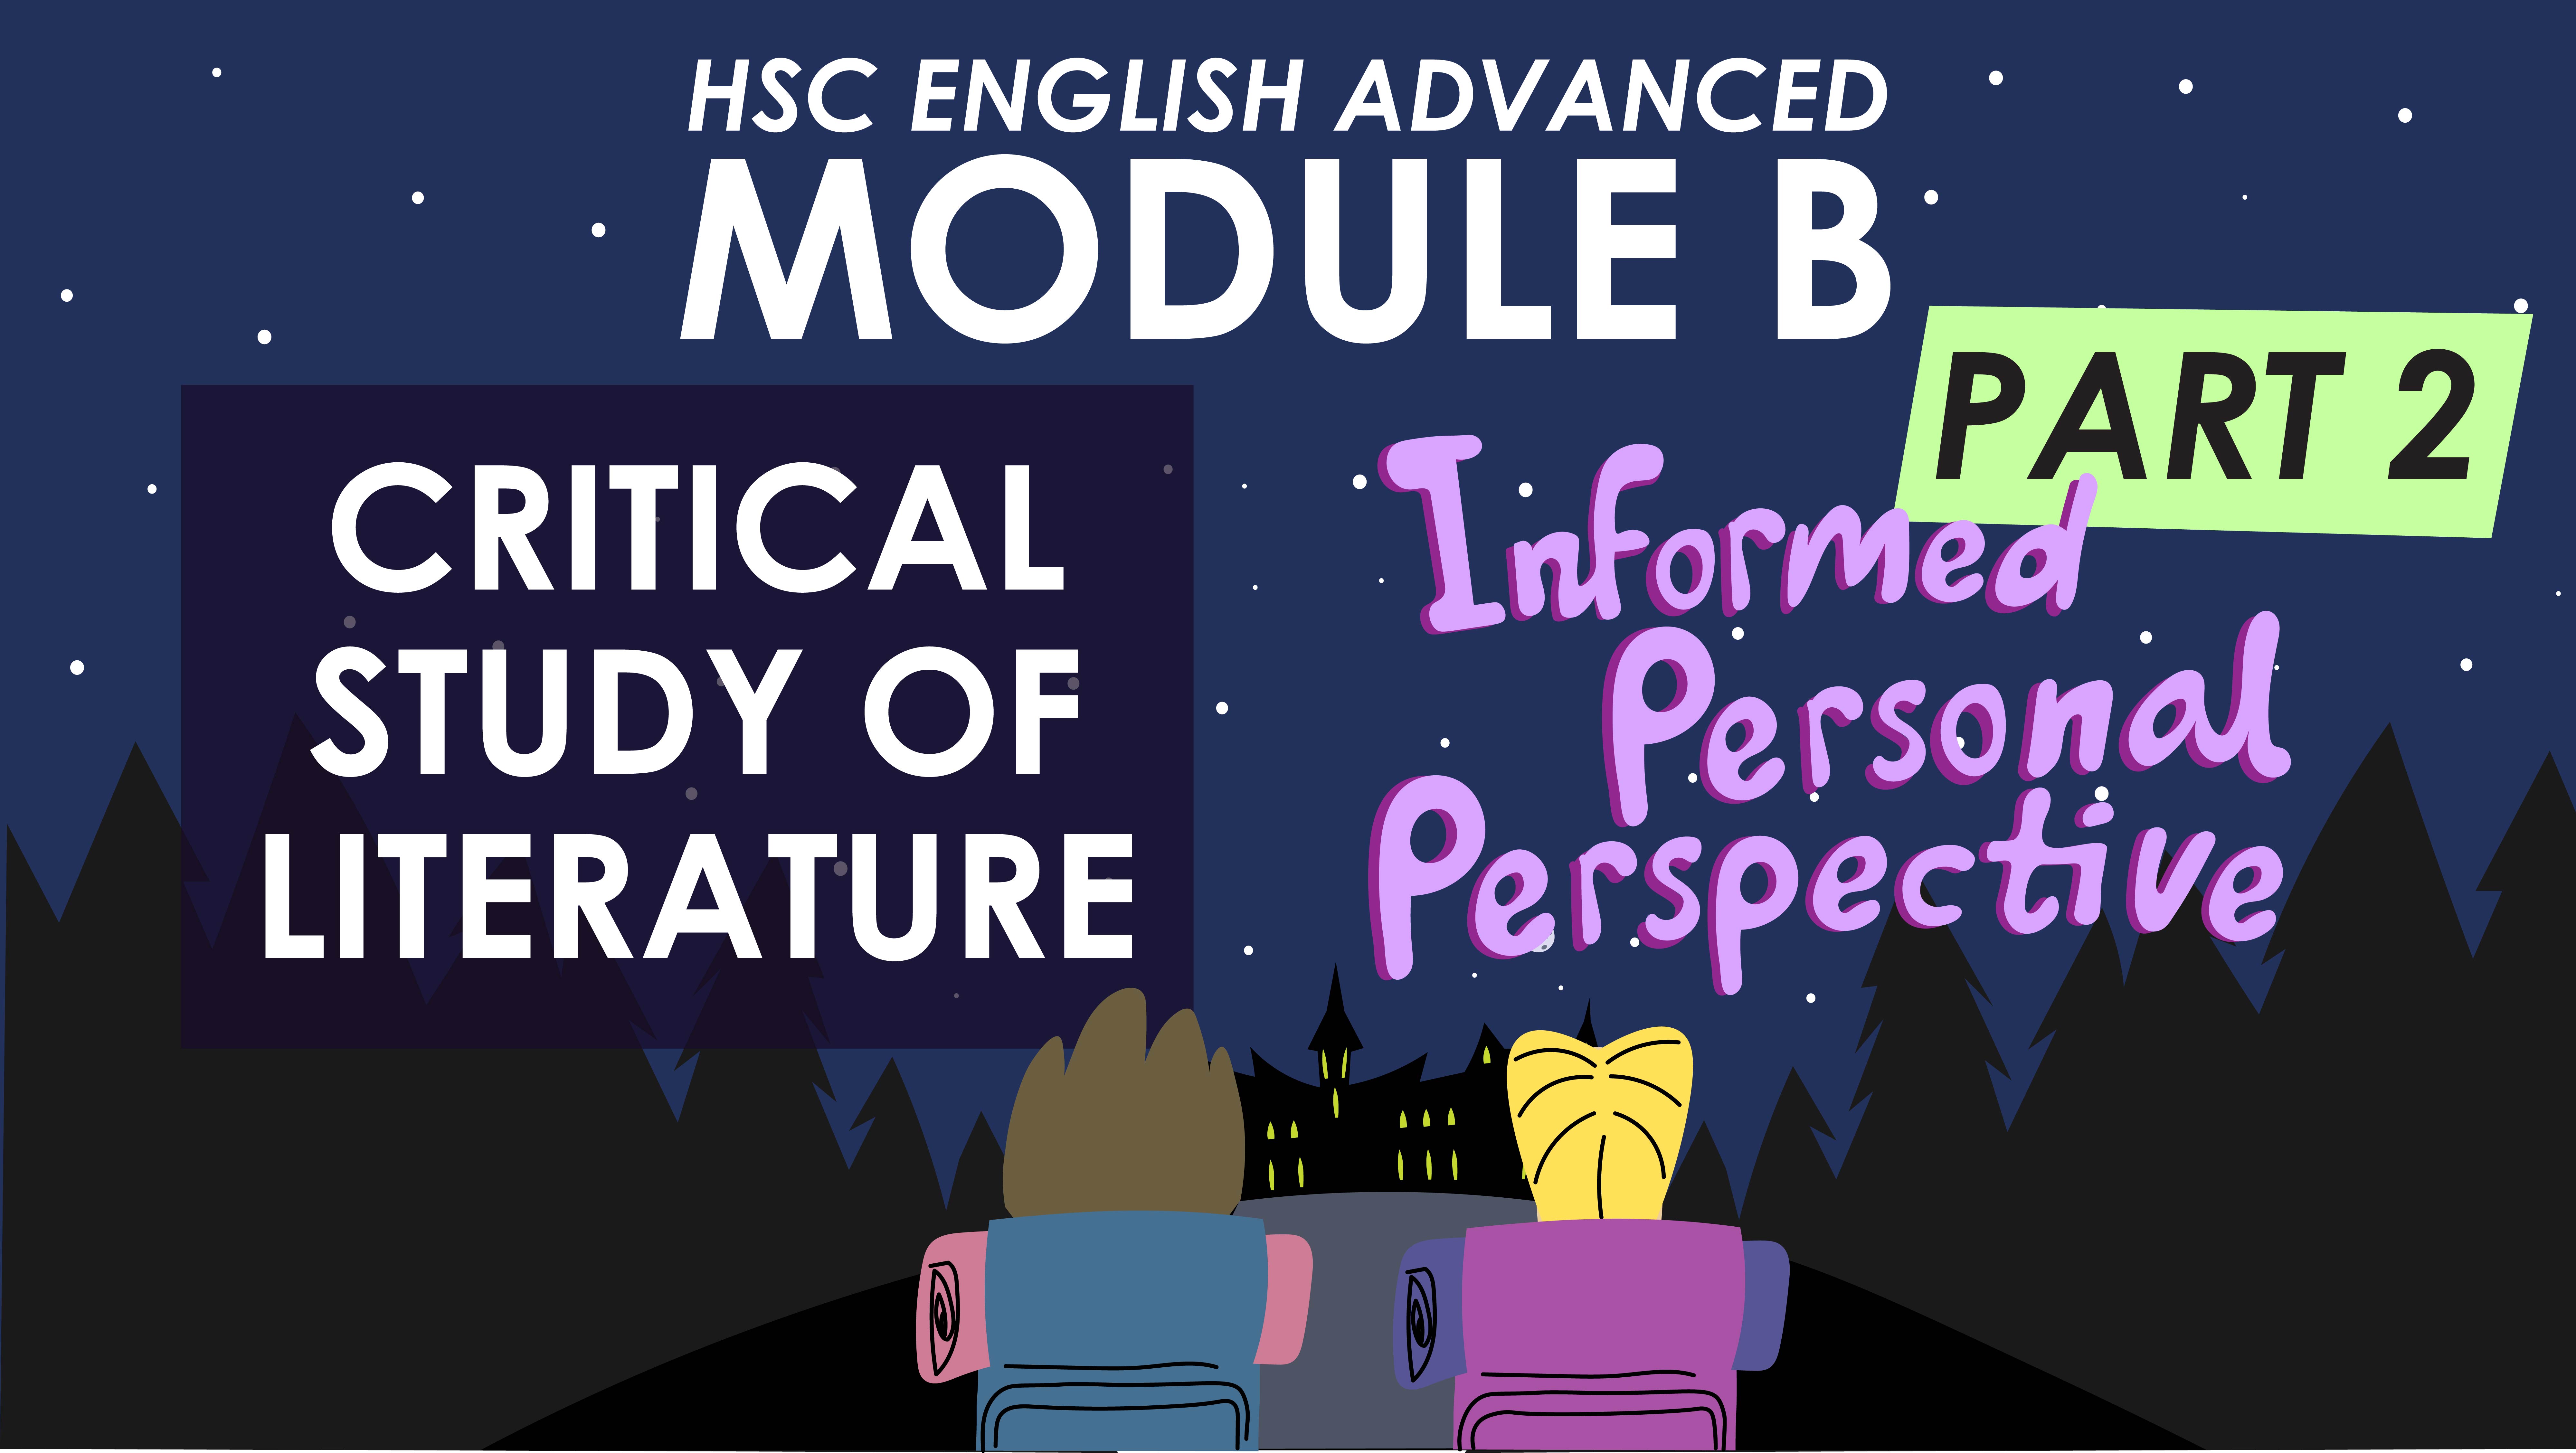 HSC English Advanced Module B Rubric Part 2 - Informed Personal Perspective